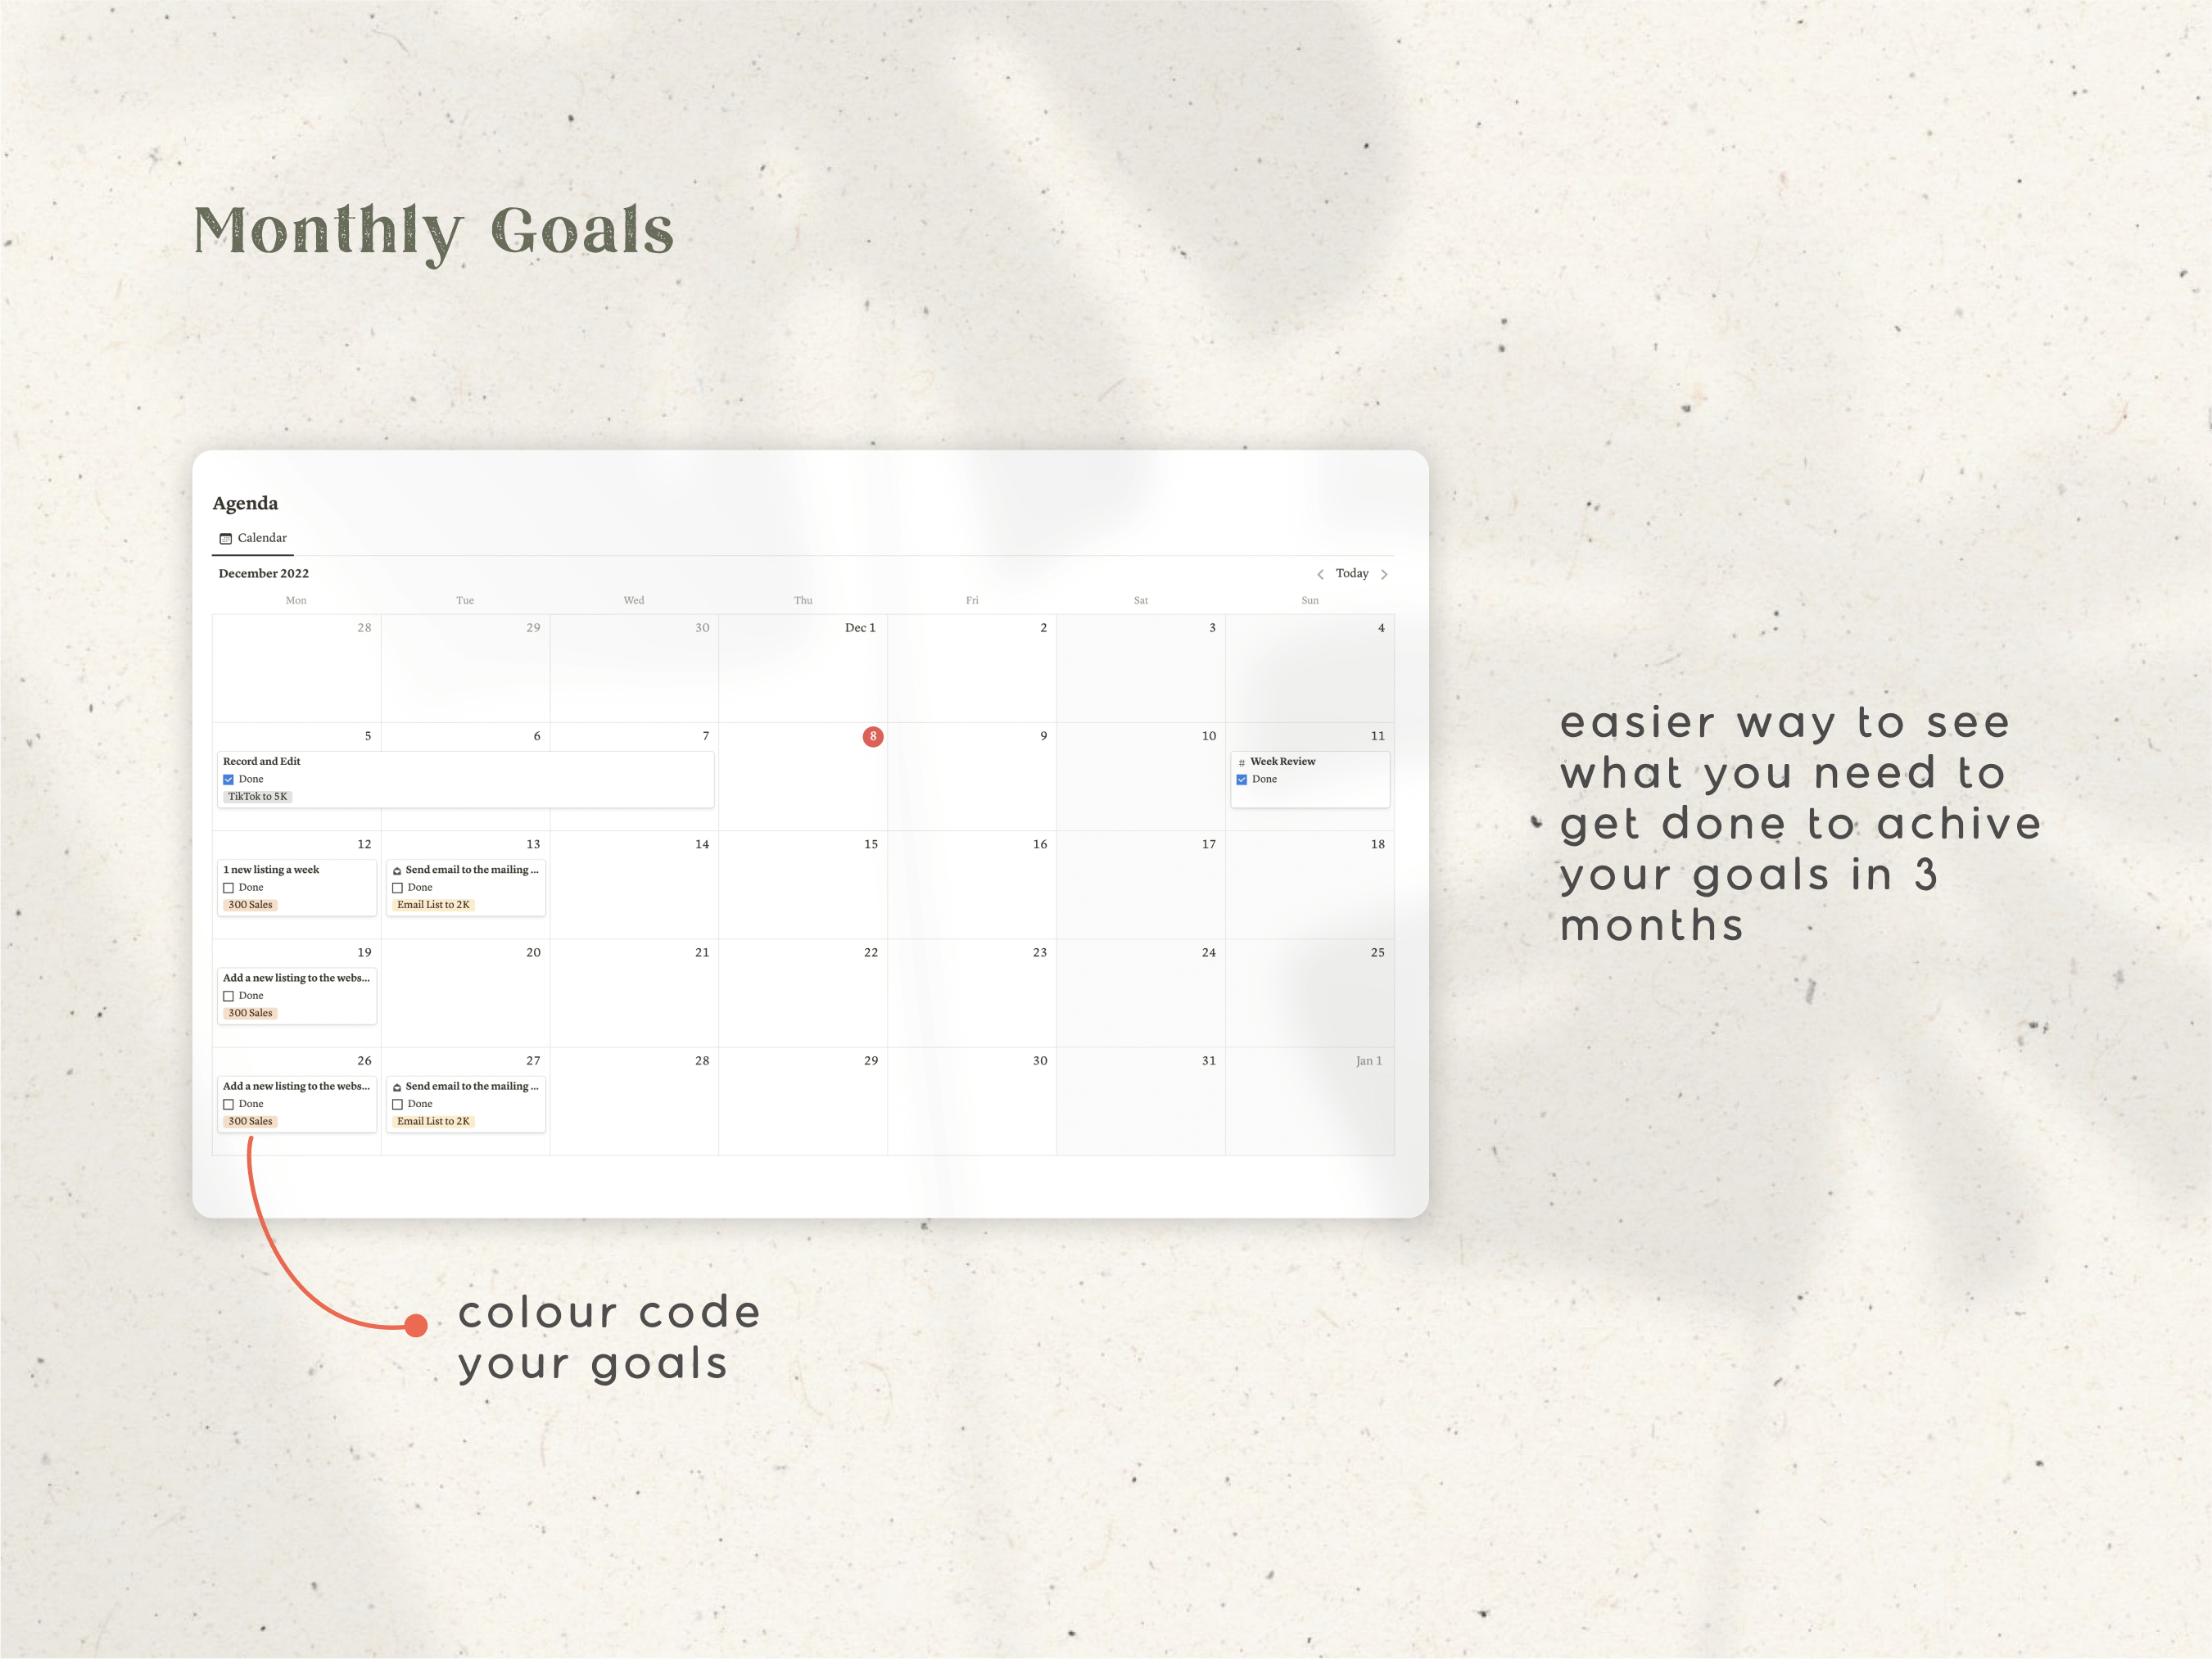 Notion template 12 week year to set 3 month goals.